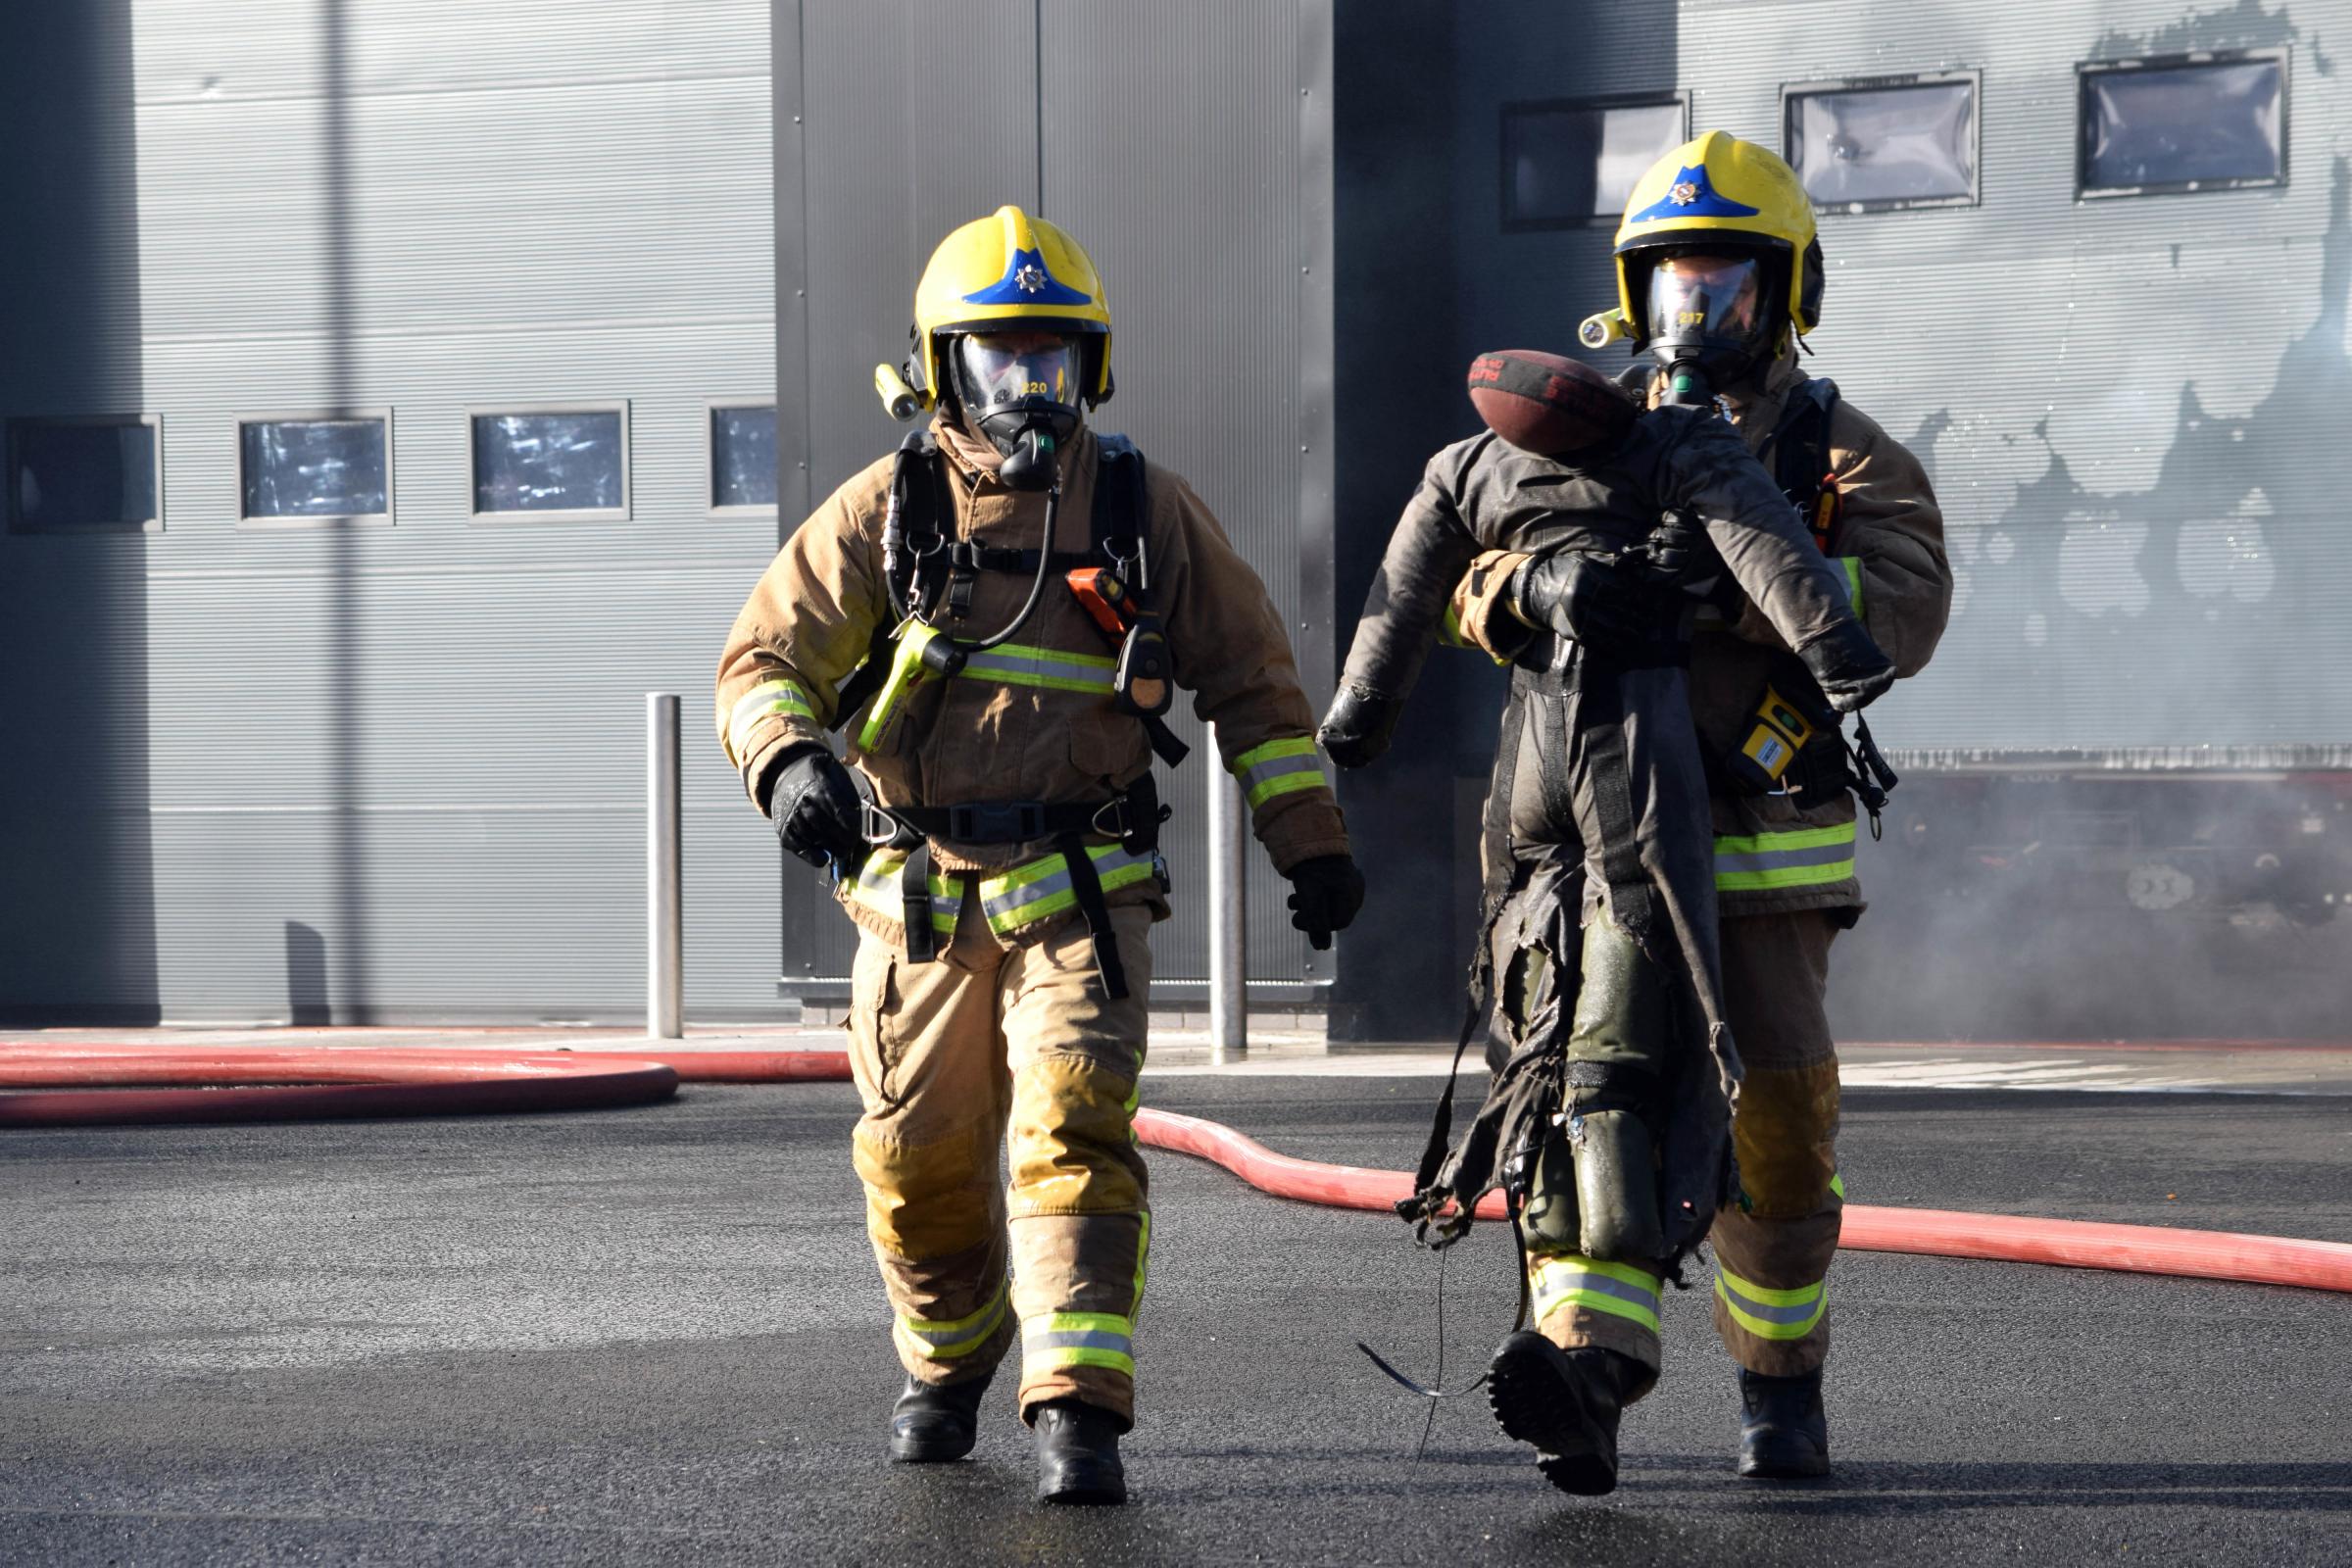 Firefighters carrying out an operational demonstrations for the guests